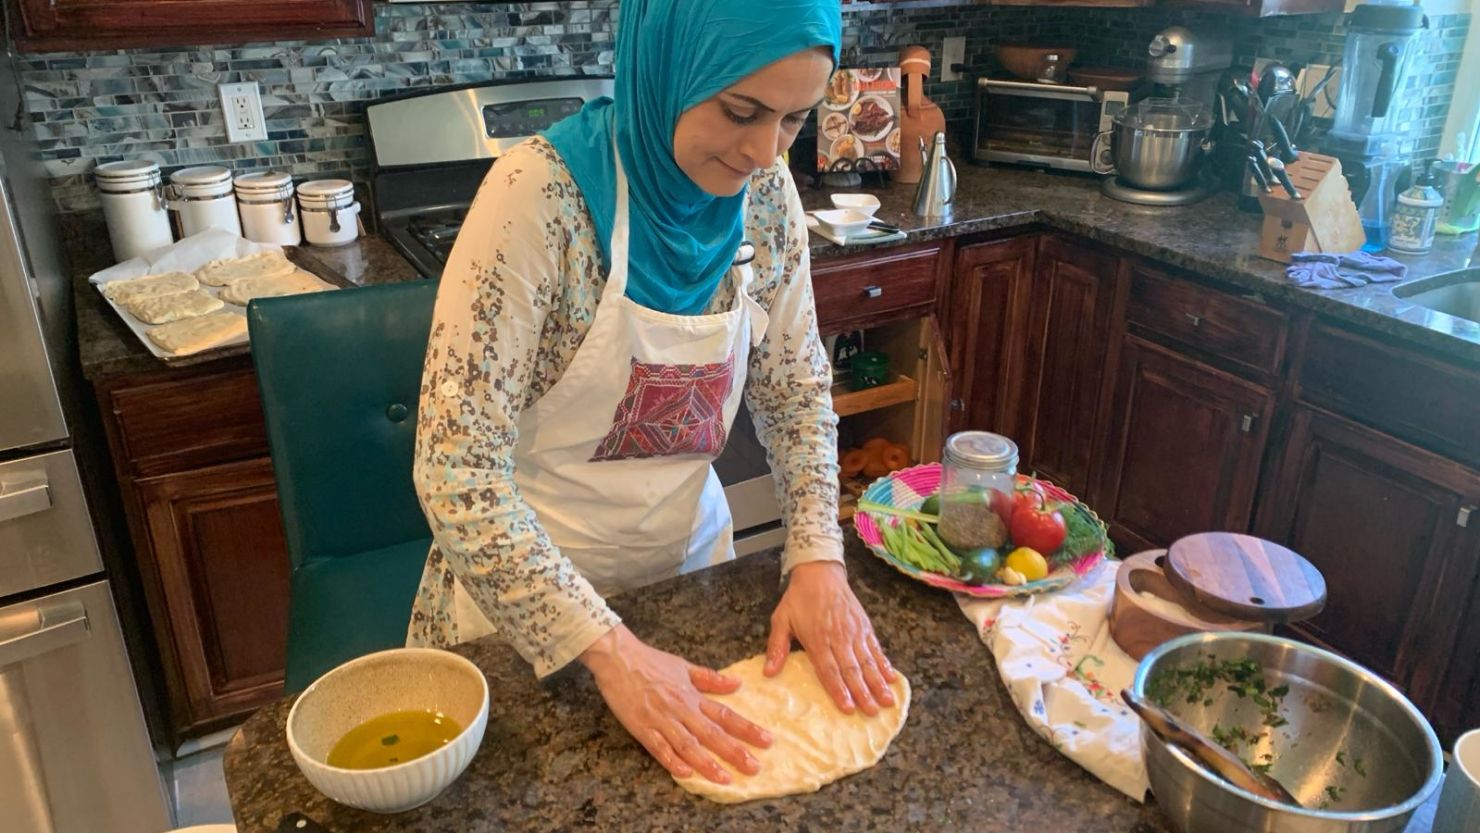 Despite feeling hopeless and overwhelmed over the crisis in Gaza, Laila El-Haddad is determined to honor Eid-al-Fitr, the three-day Muslim holiday marking the end of Ramadan.